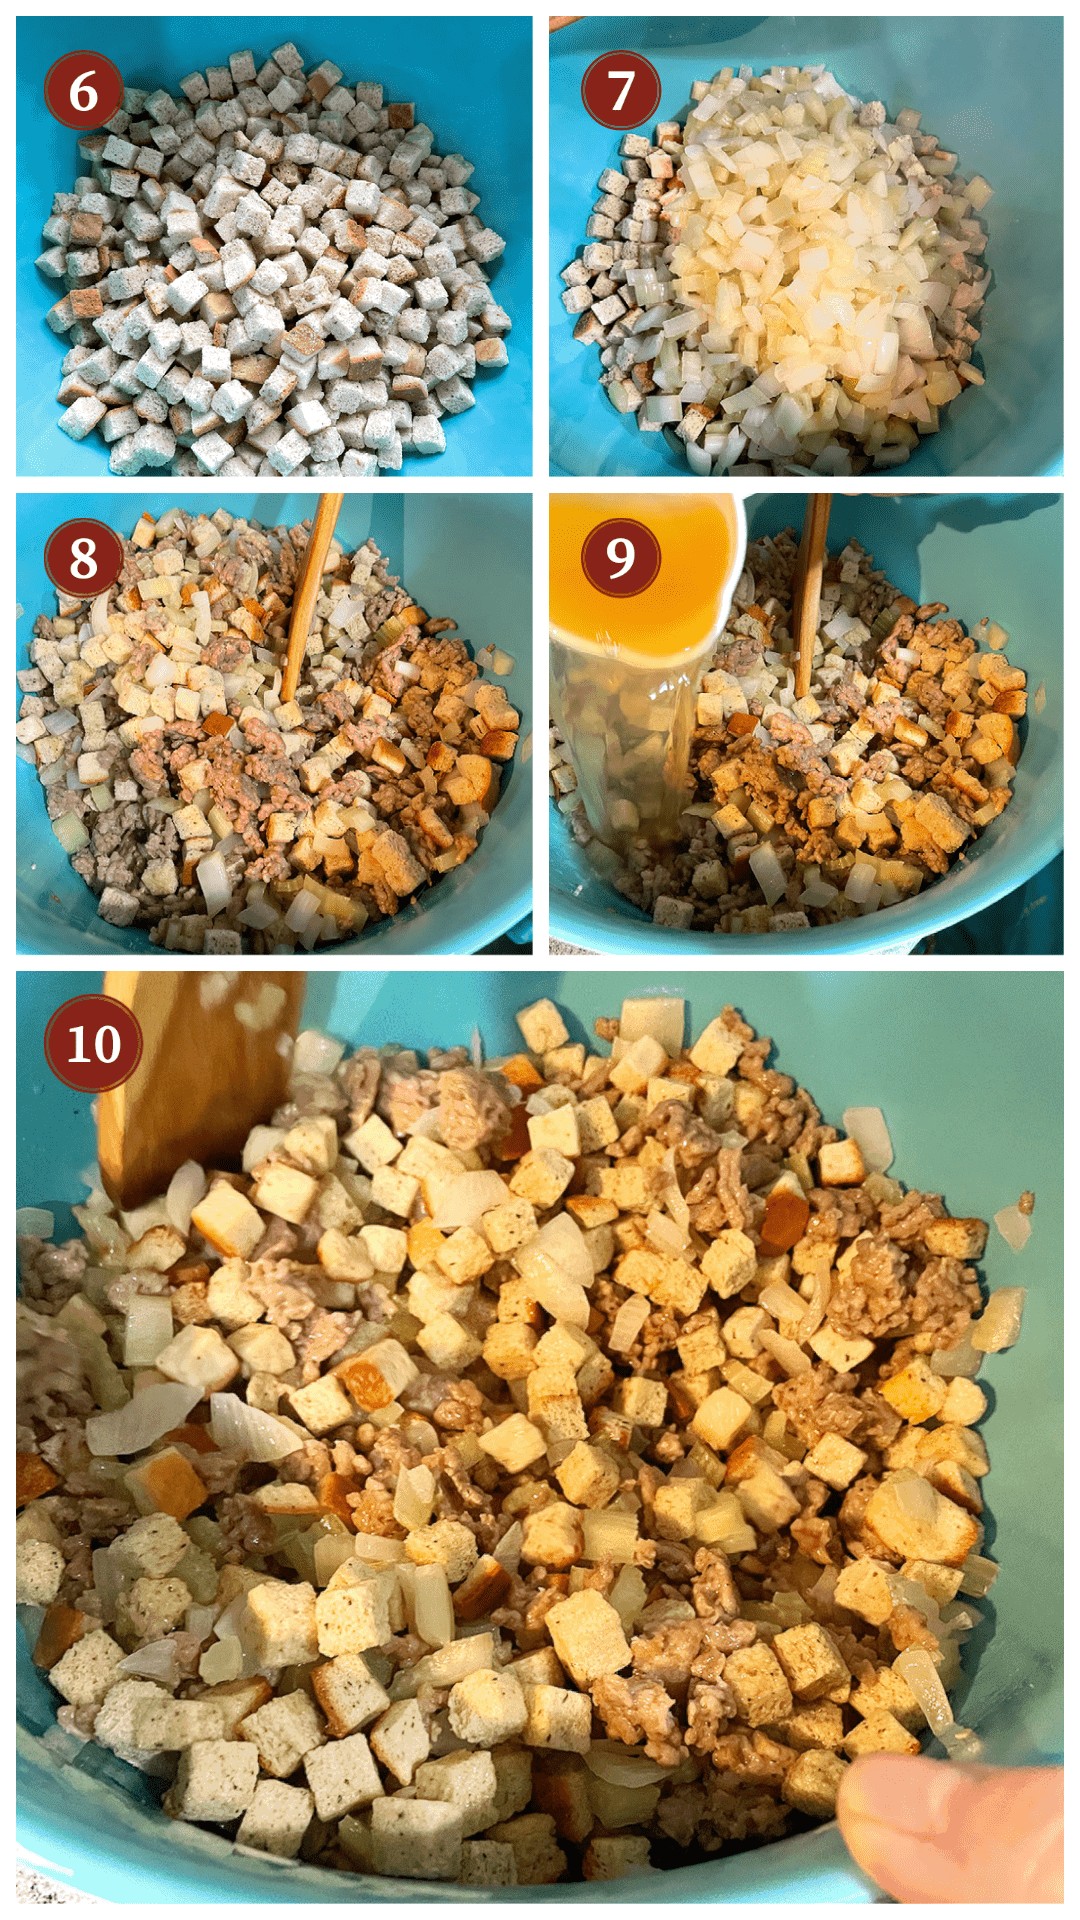 A collage of images showing how to make homemade stuffing, steps 6 - 10.